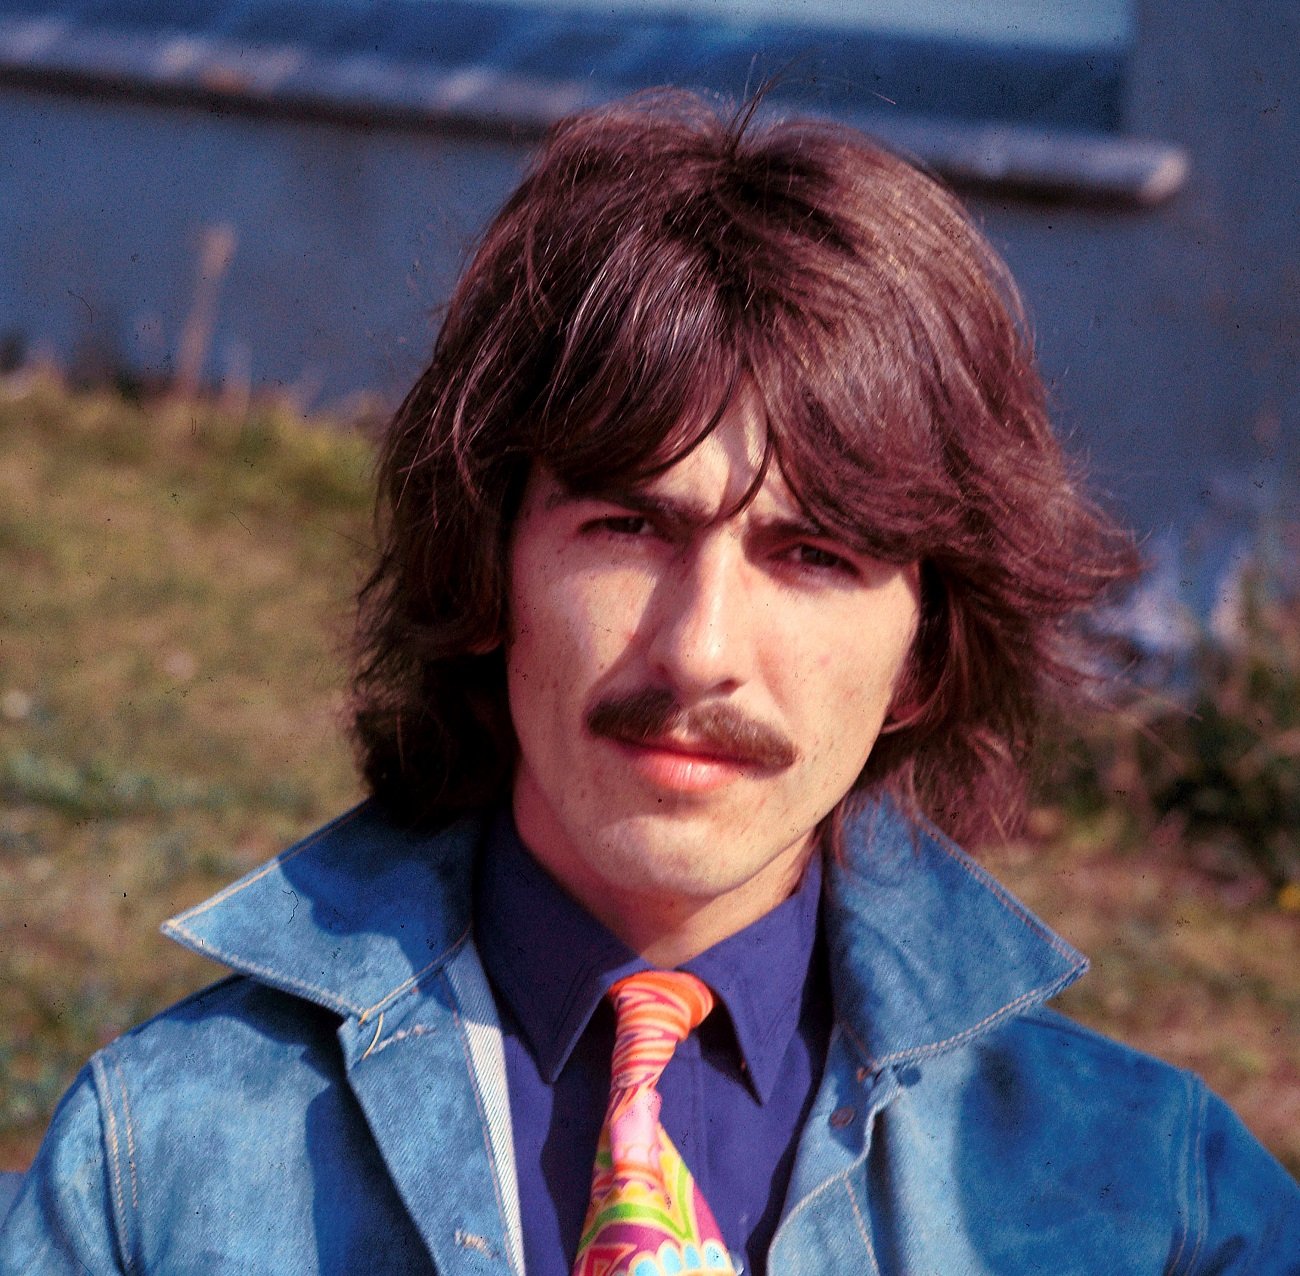 George Harrison Intimidated 3 Hells Angels Who ‘Must Have Outweighed Him by 200 Lbs’